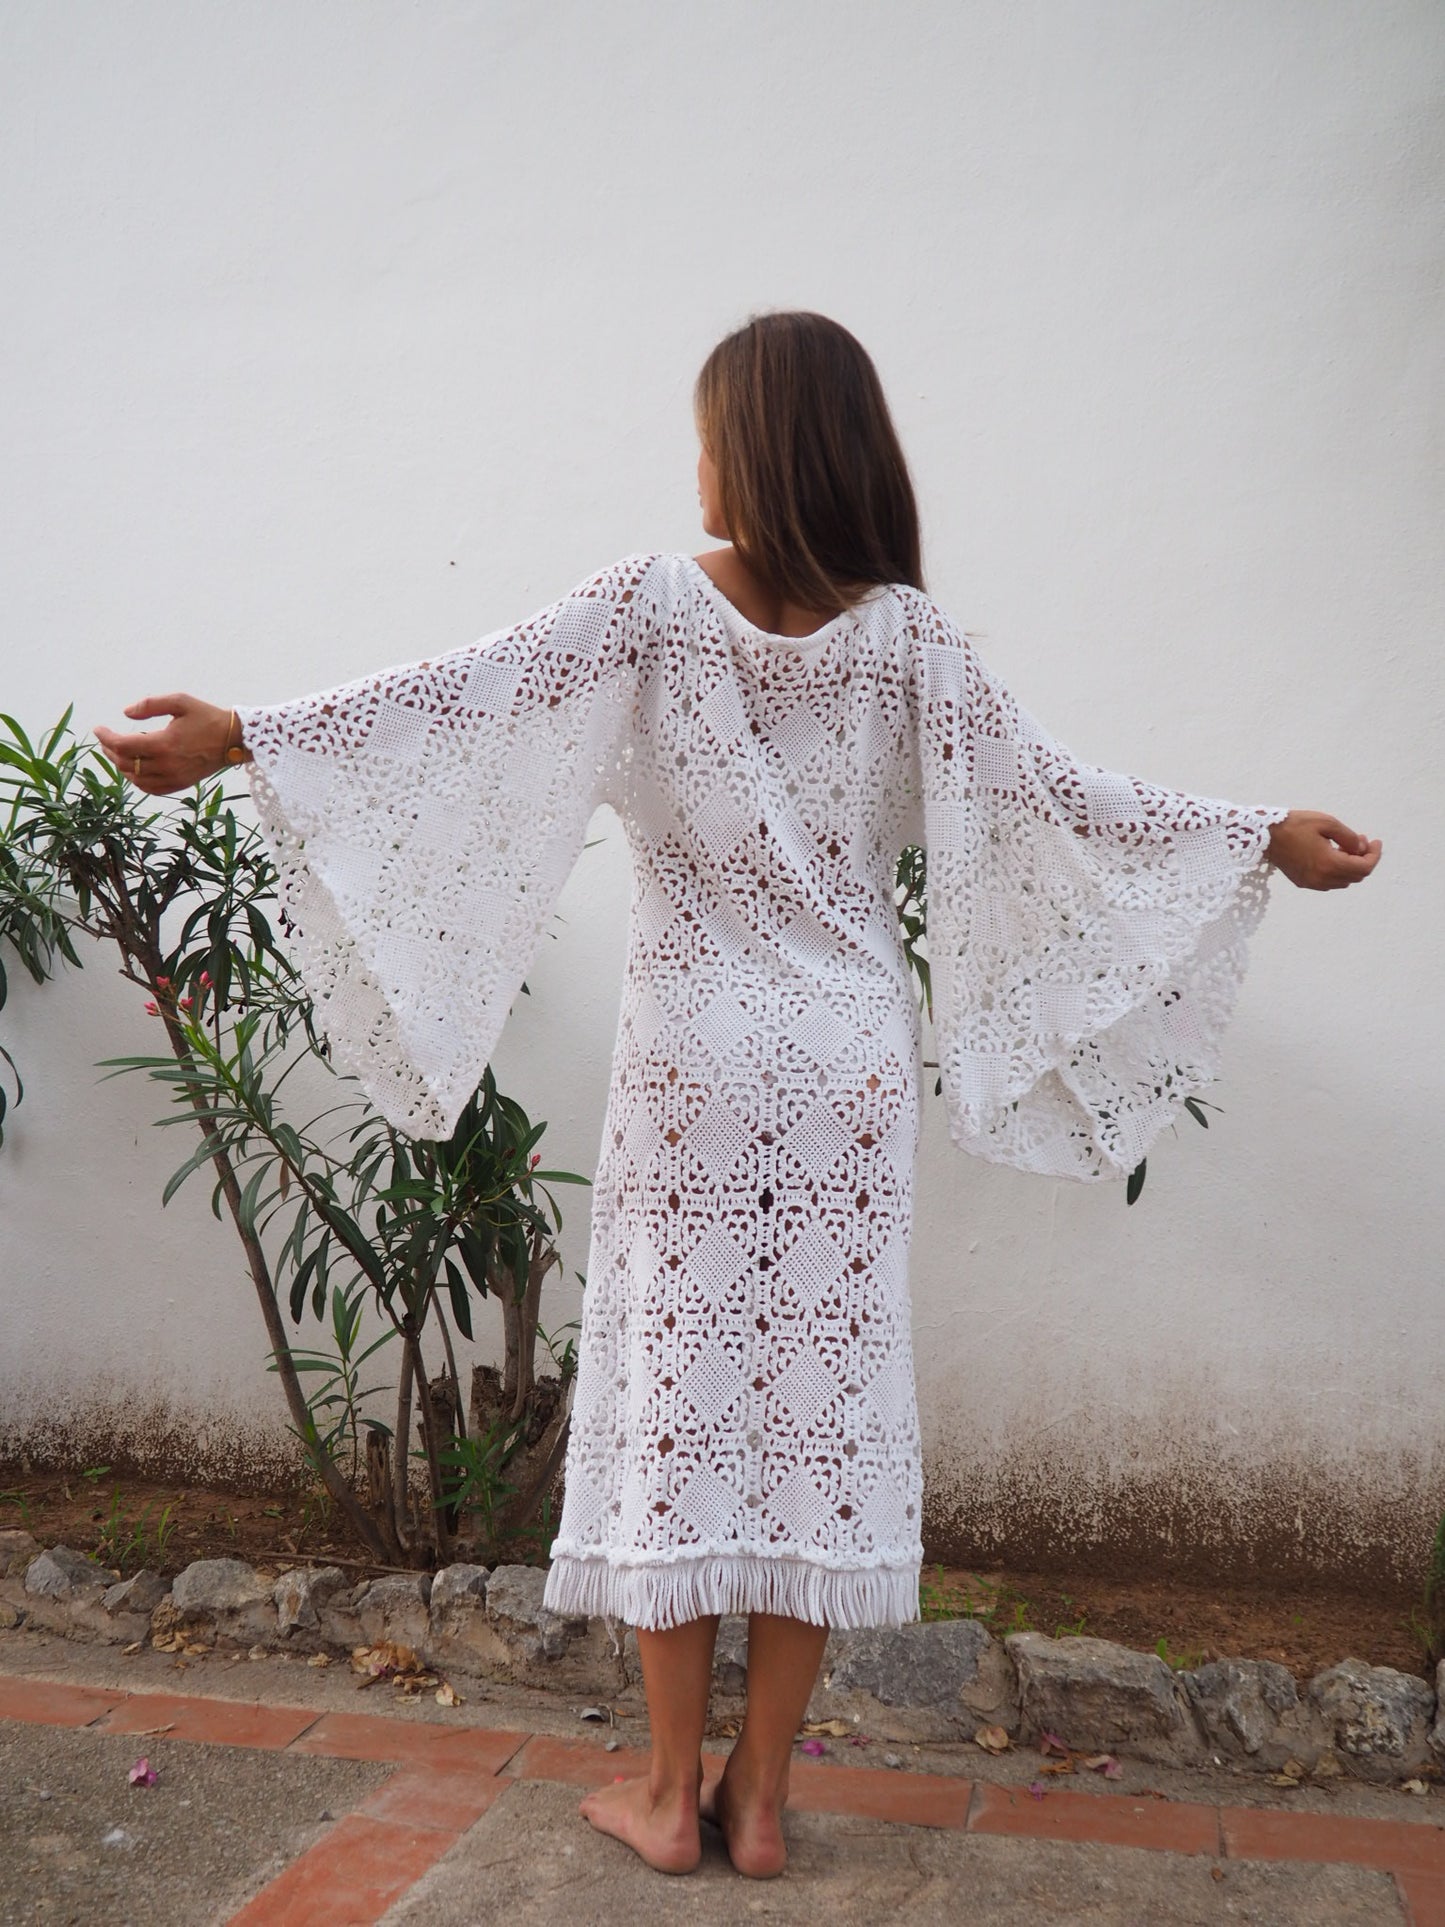 Vintage white 1960’s handmade detailed crochet lace dress up-cycled by Vagabond Ibiza